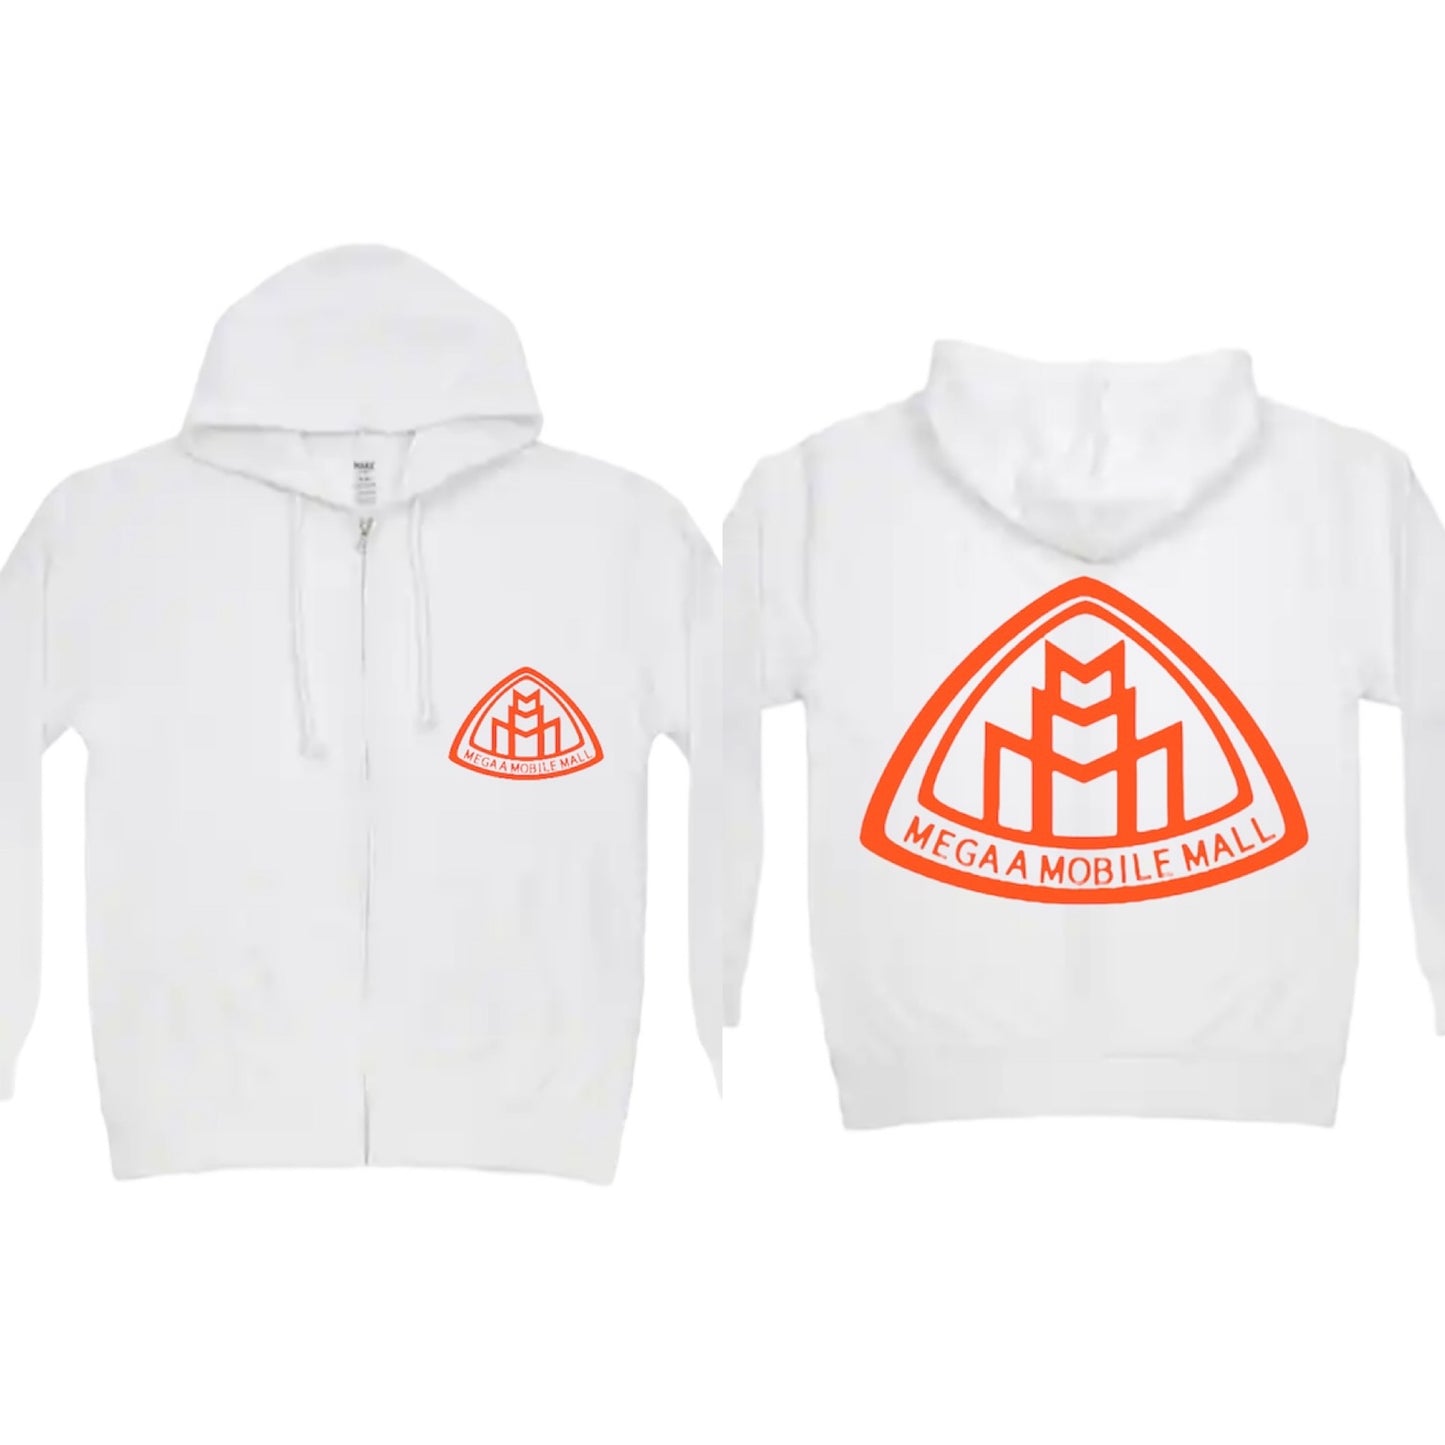 megaamobilemall white zip up hoodie with orange logo